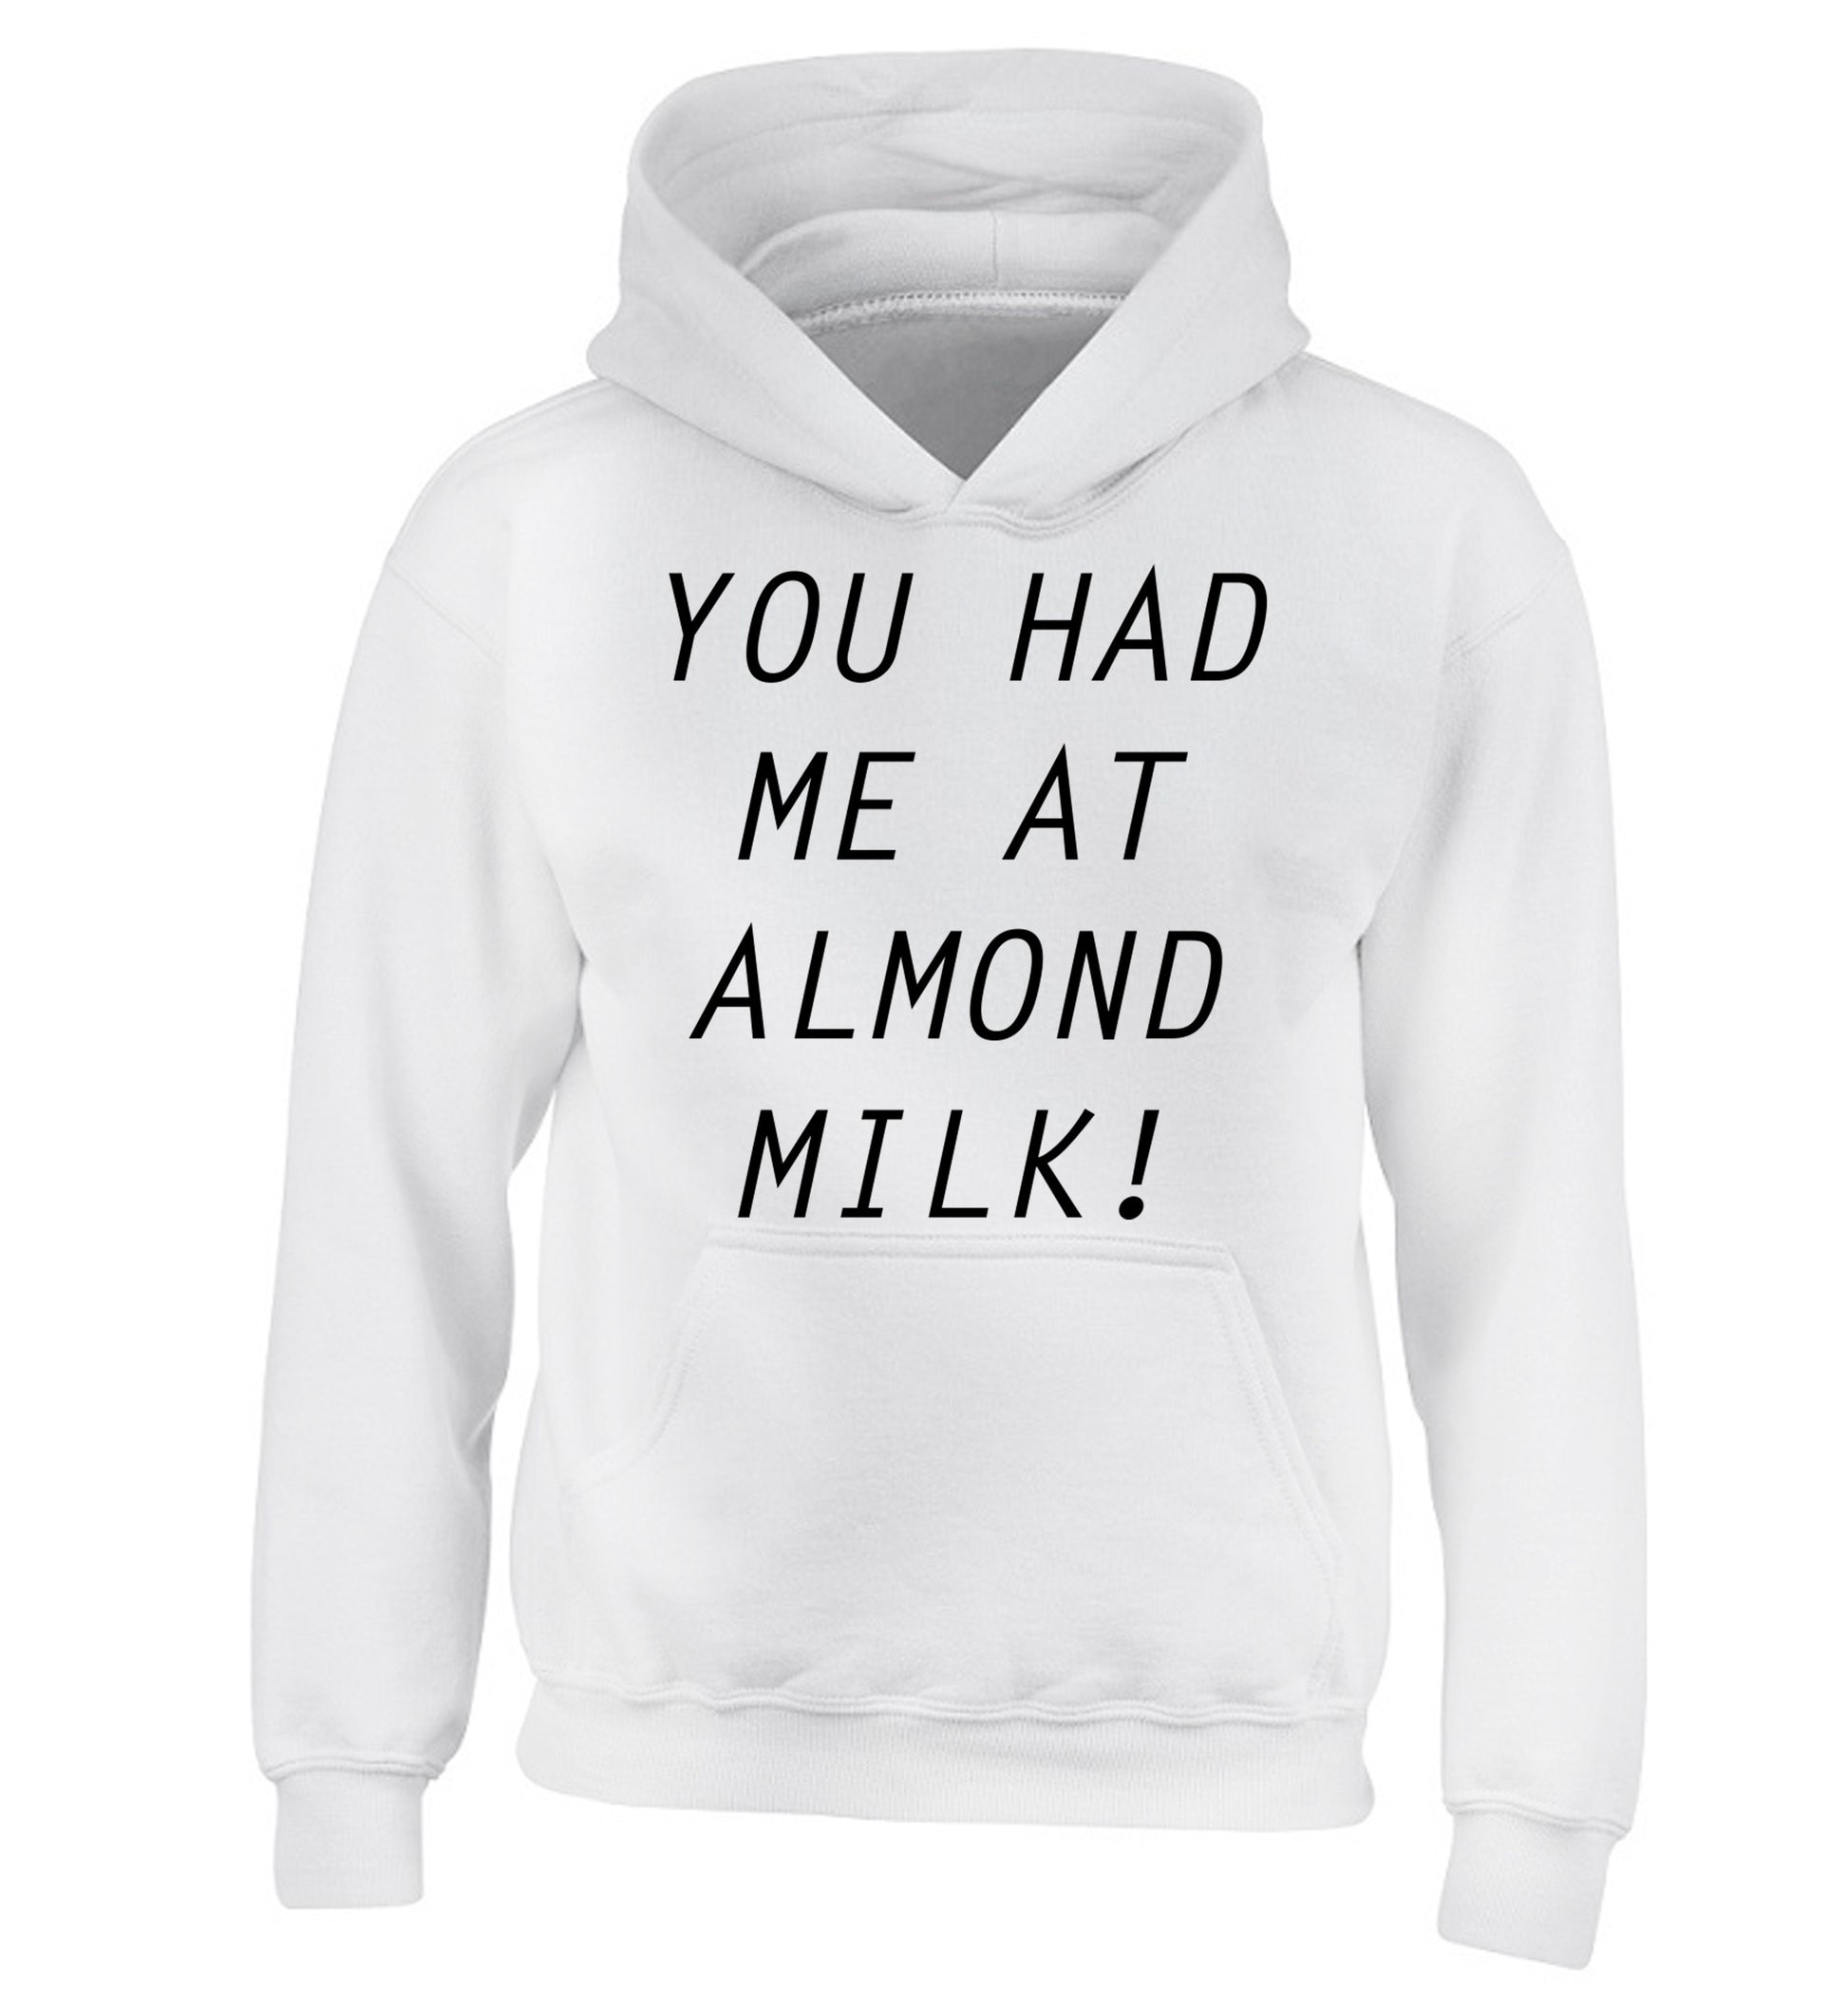 You had me at almond milk children's white hoodie 12-14 Years